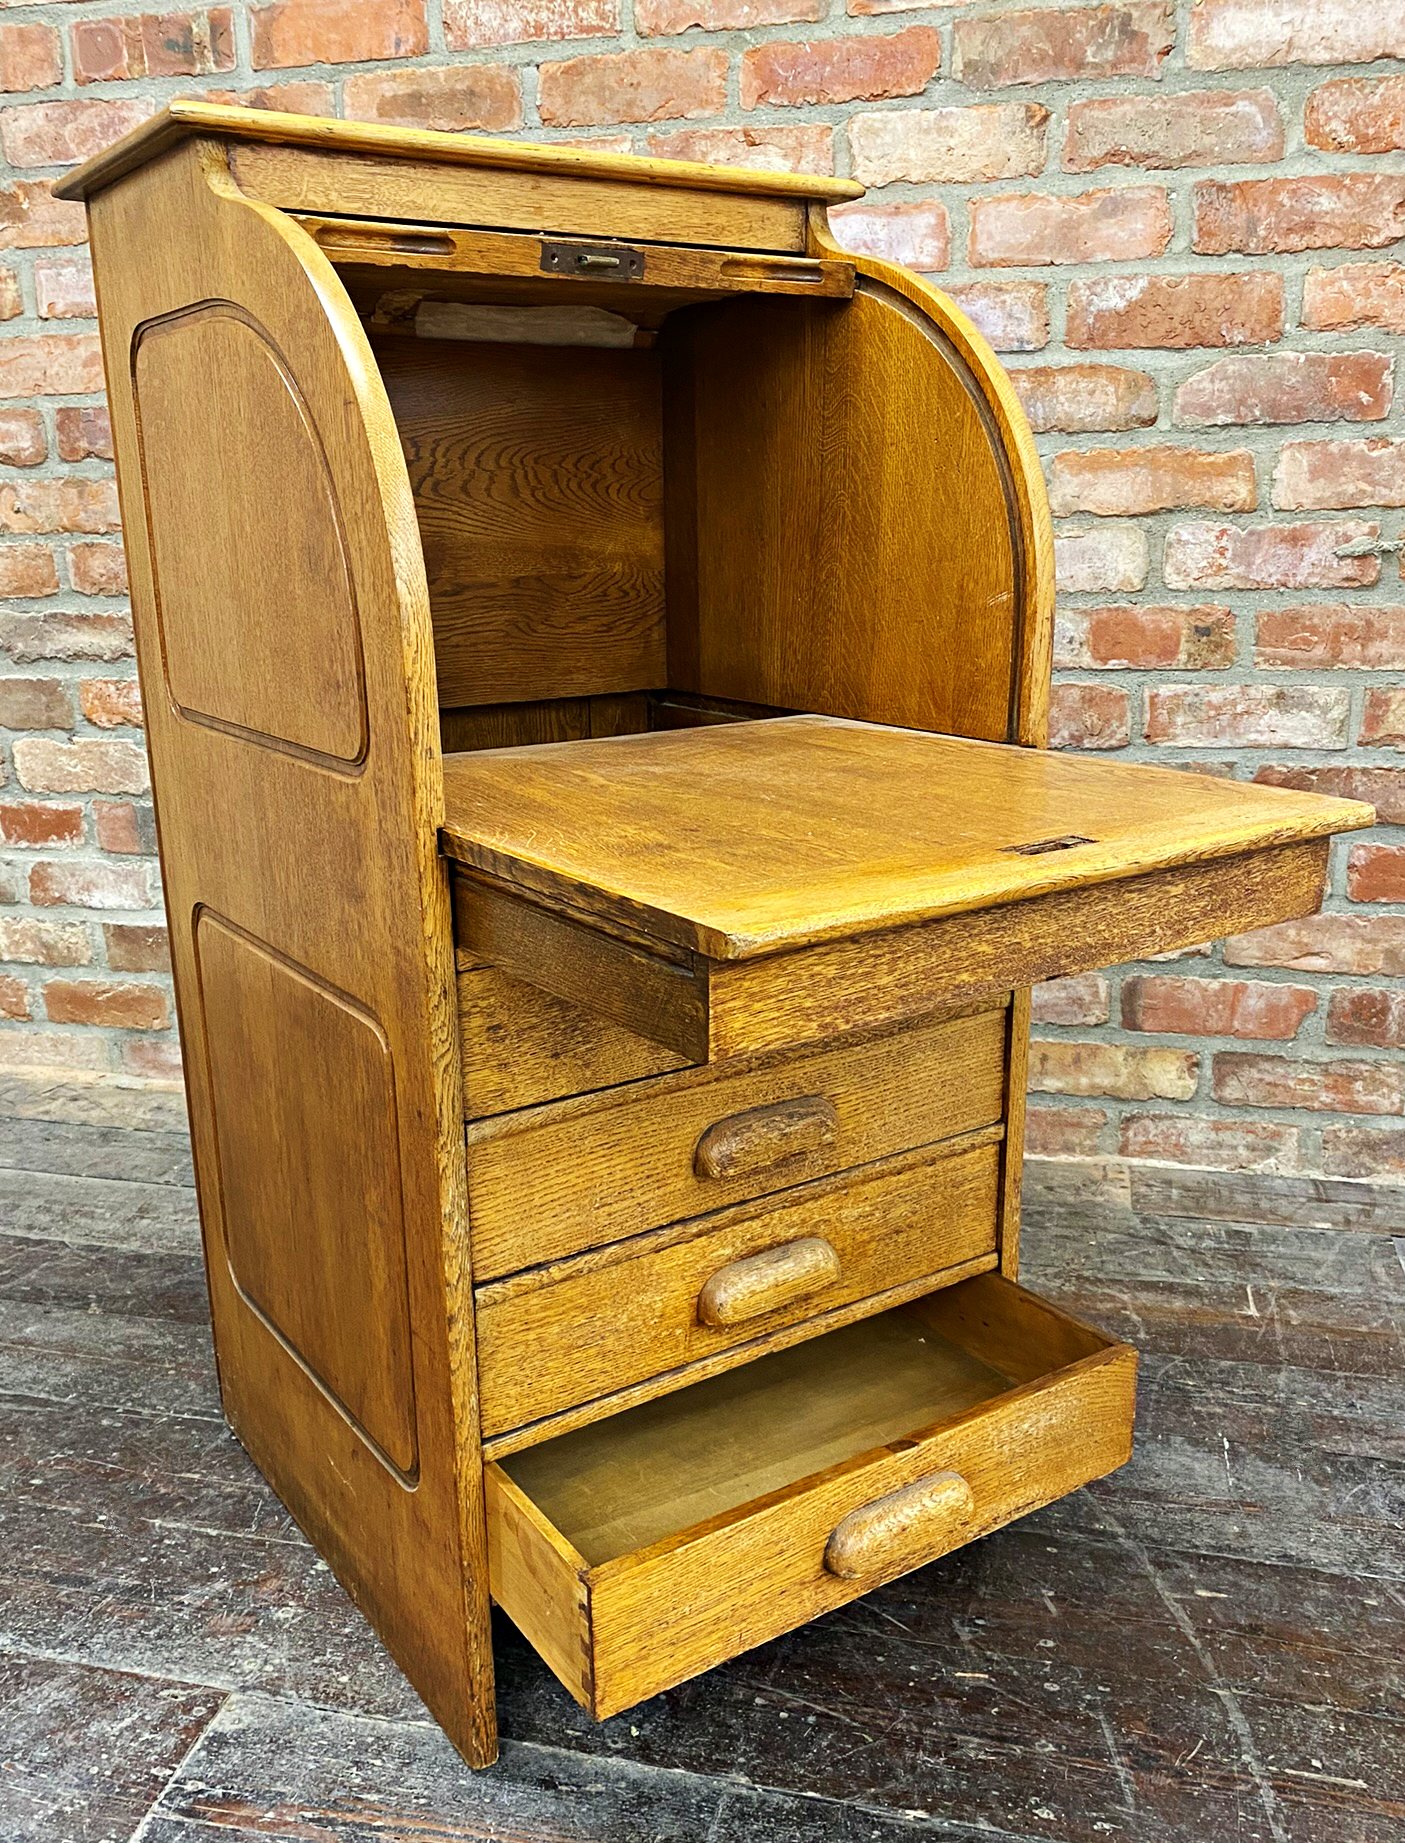 Sweet early 20th century golden oak students bureau, with tambour front, concealed work surface - Image 3 of 3